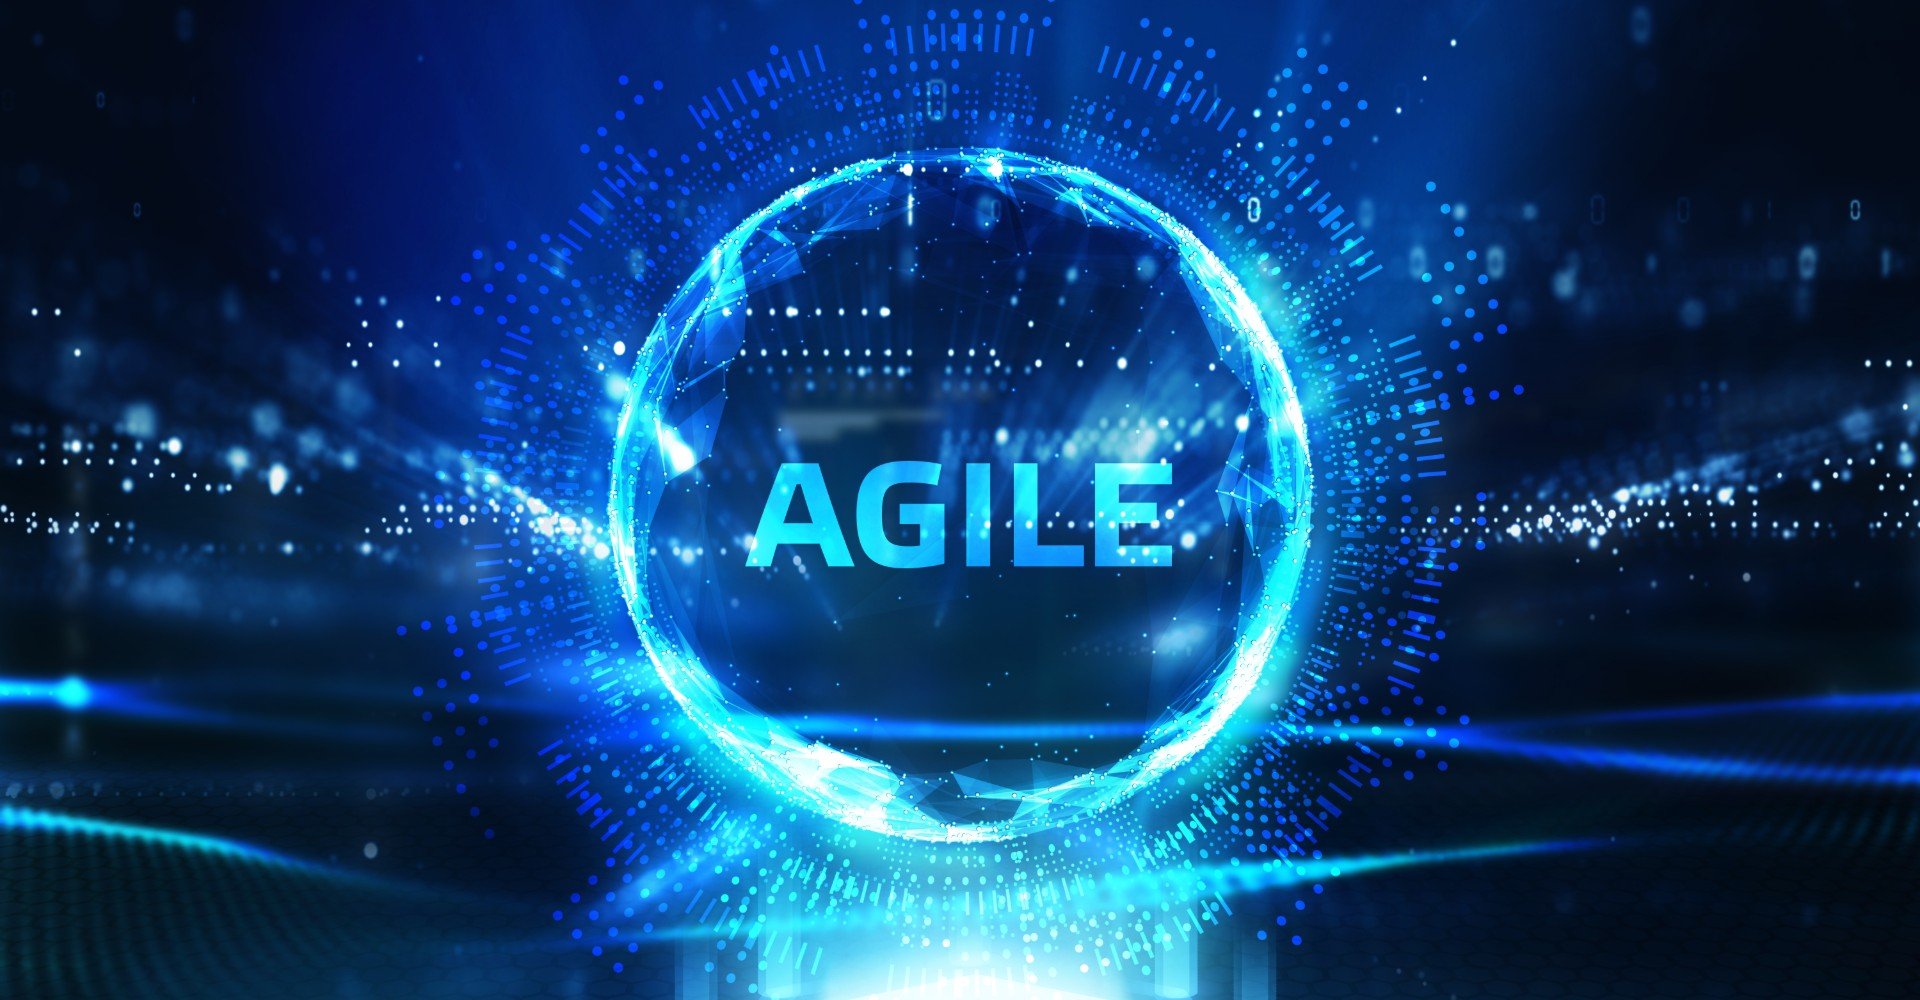 What are the Current Trends in Agile Development?